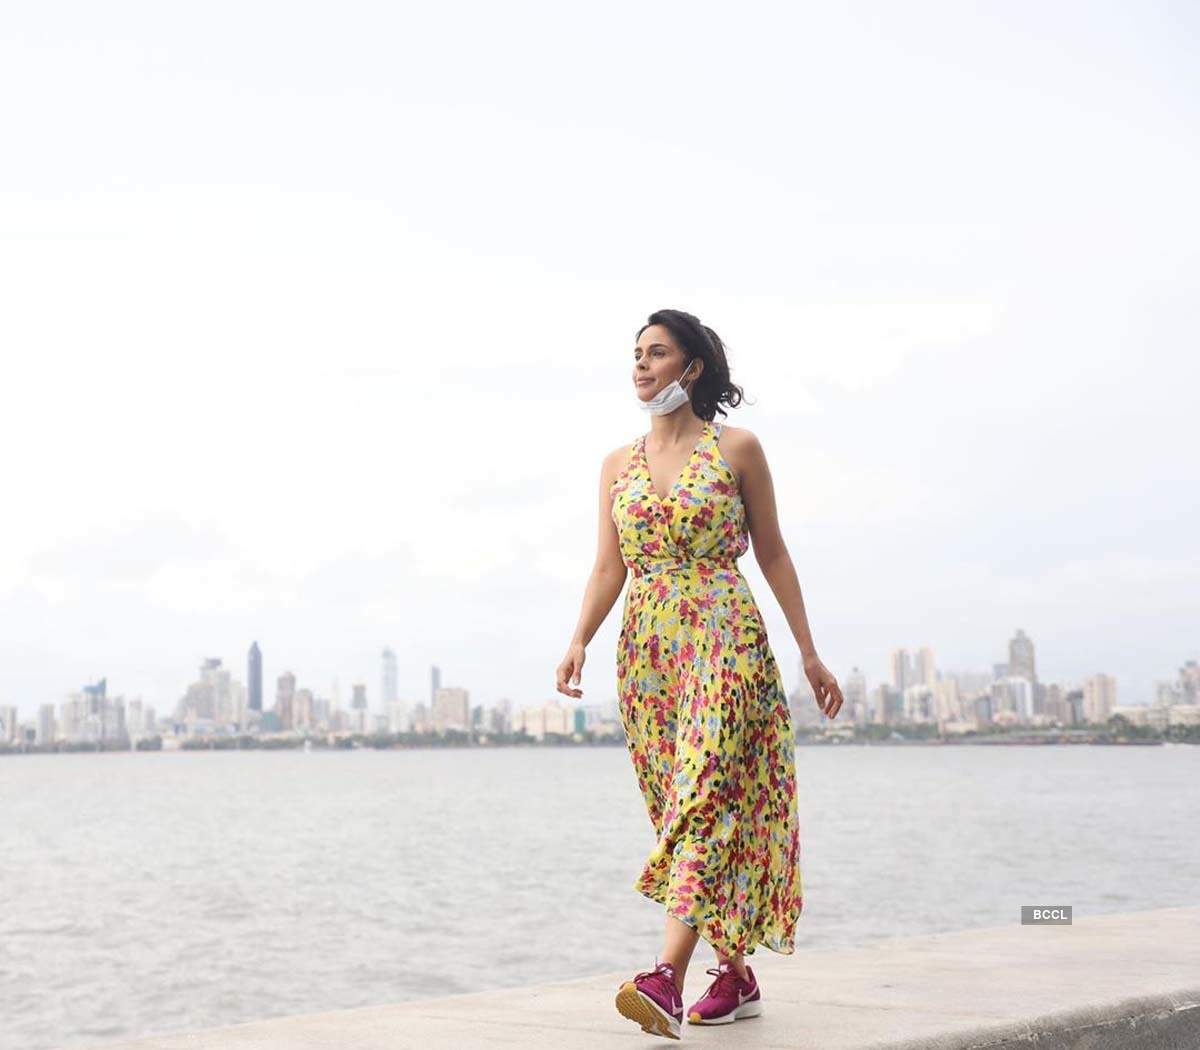 Mallika Sherawat's new picture with Mumbai Police personnel at Marine Drive makes fans curious